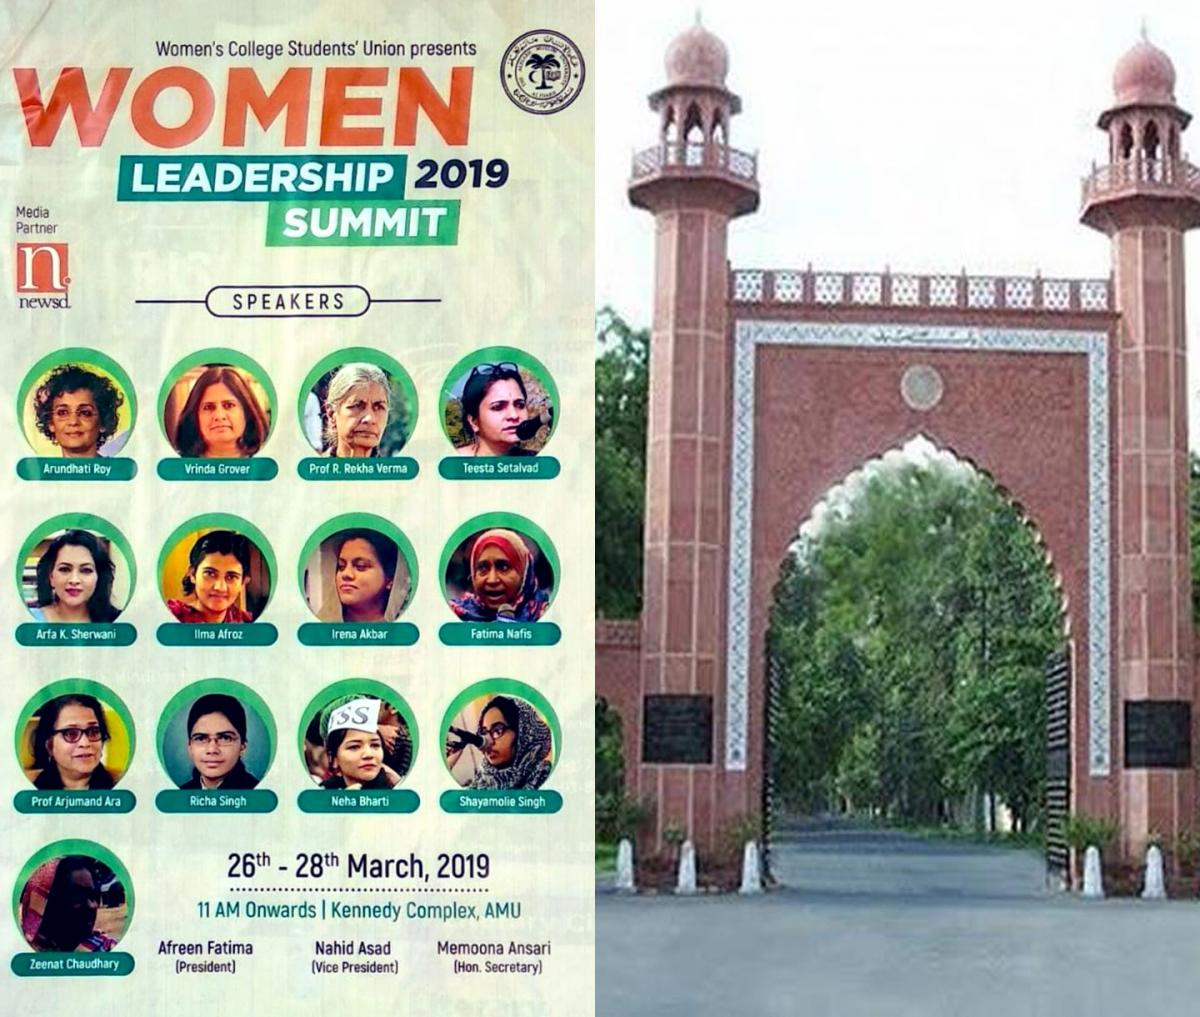 AMU: Male Students try to Derail Feminist Event organised by Women Students  | SabrangIndia